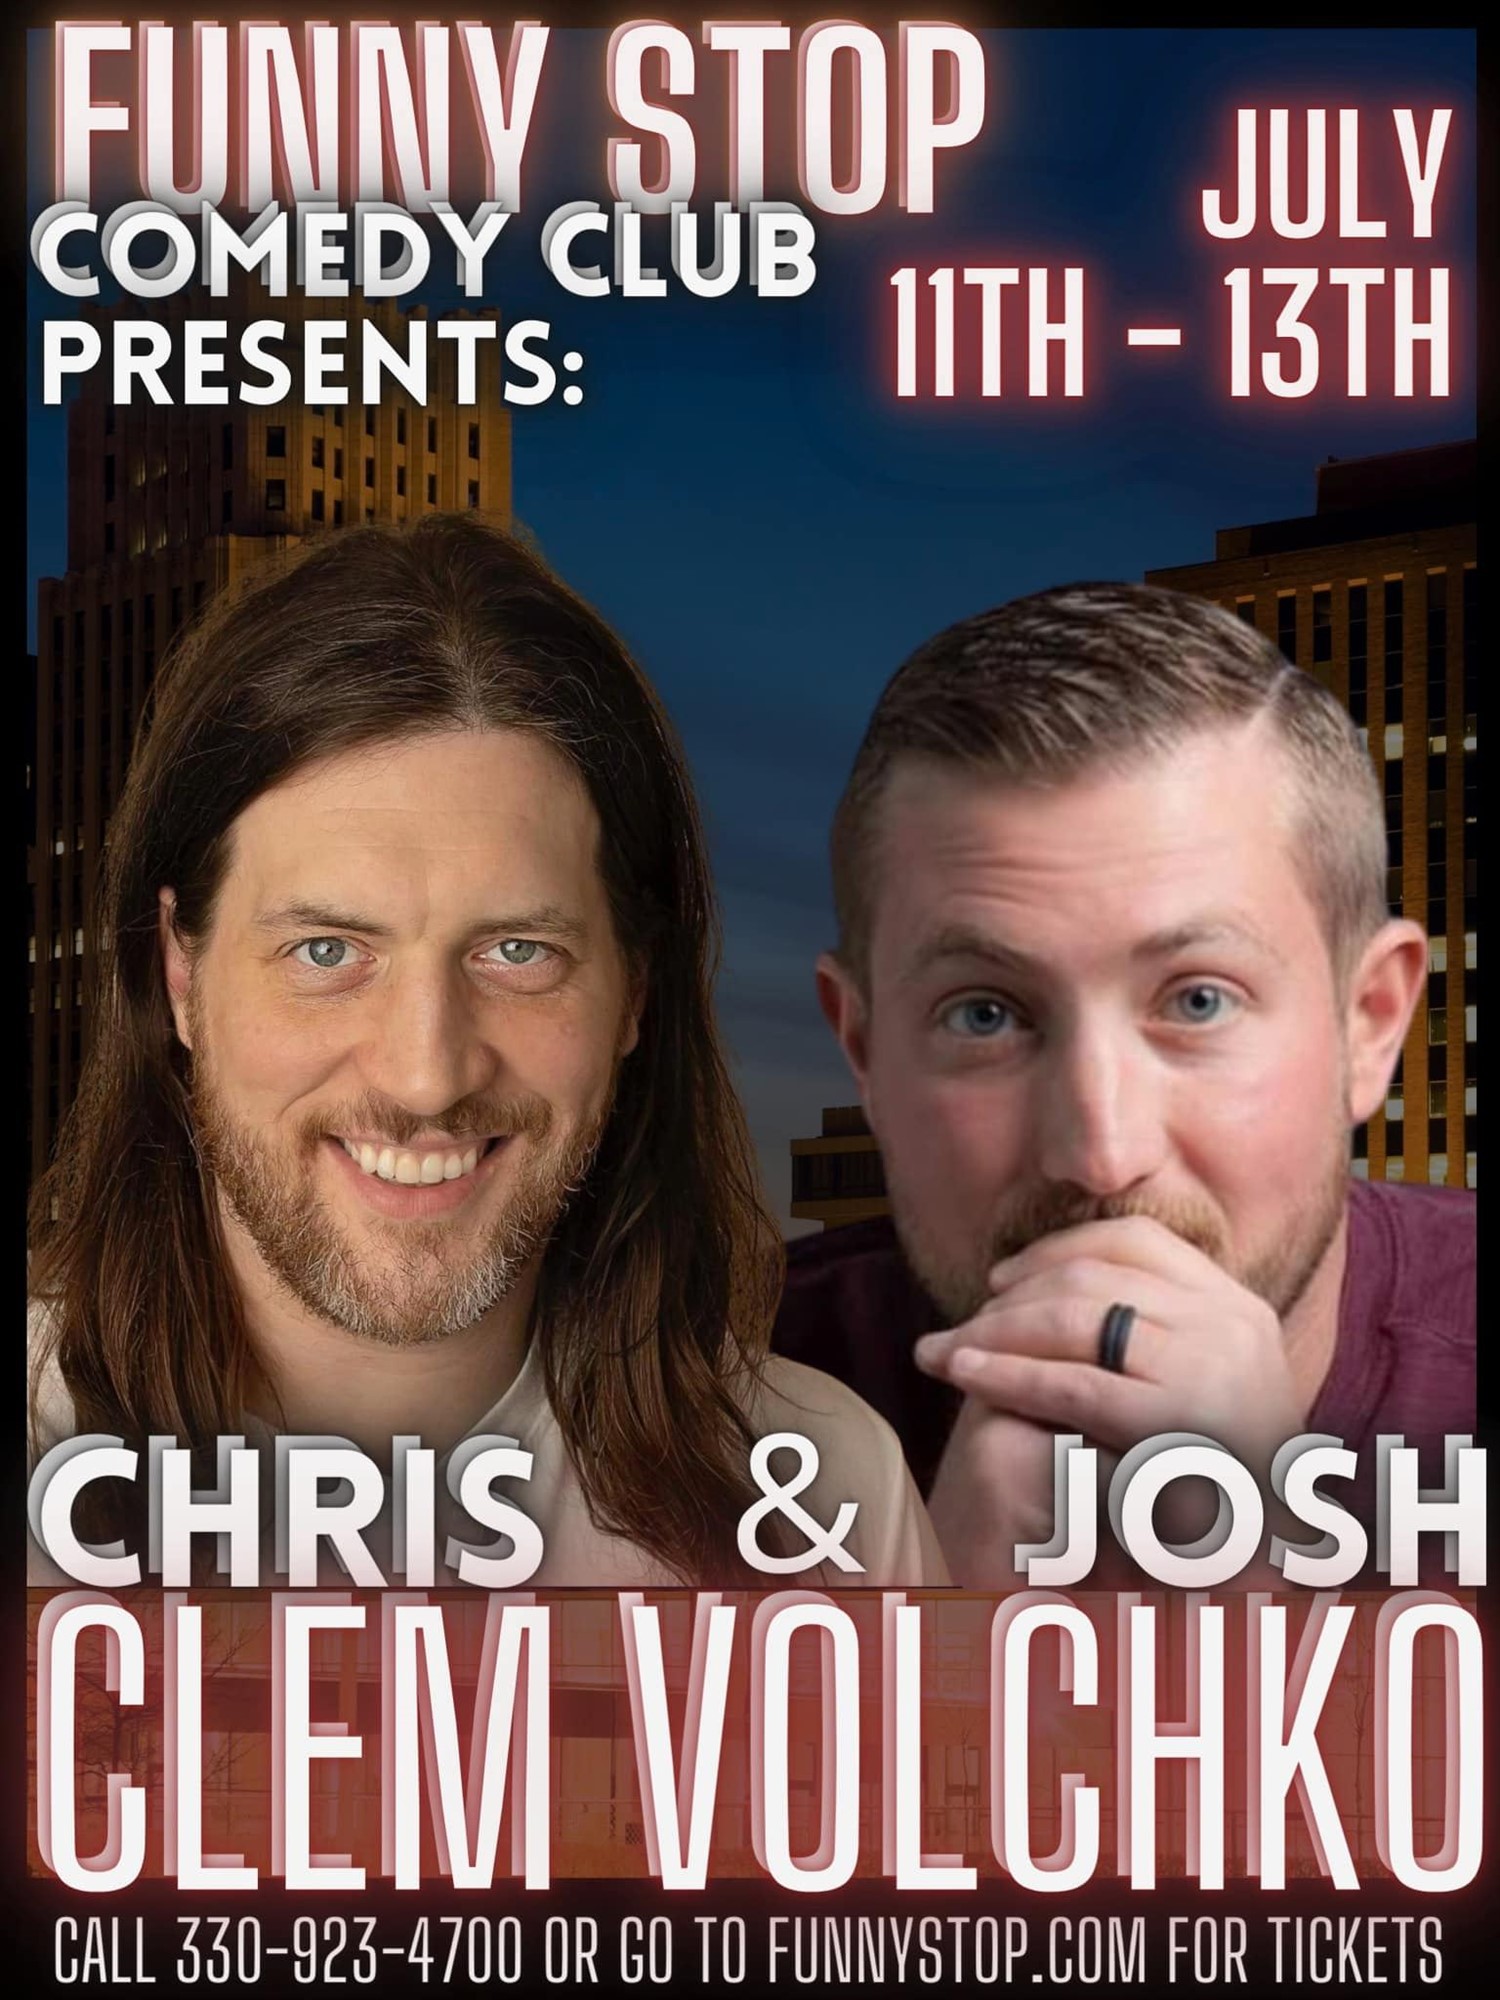 Chris Clem & Josh Volchko - Thur. 8:00PM Show Funny Stop Comedy Club on Jul 11, 20:00@Funny Stop Comedy Club - Buy tickets and Get information on Funny Stop funnystop.online